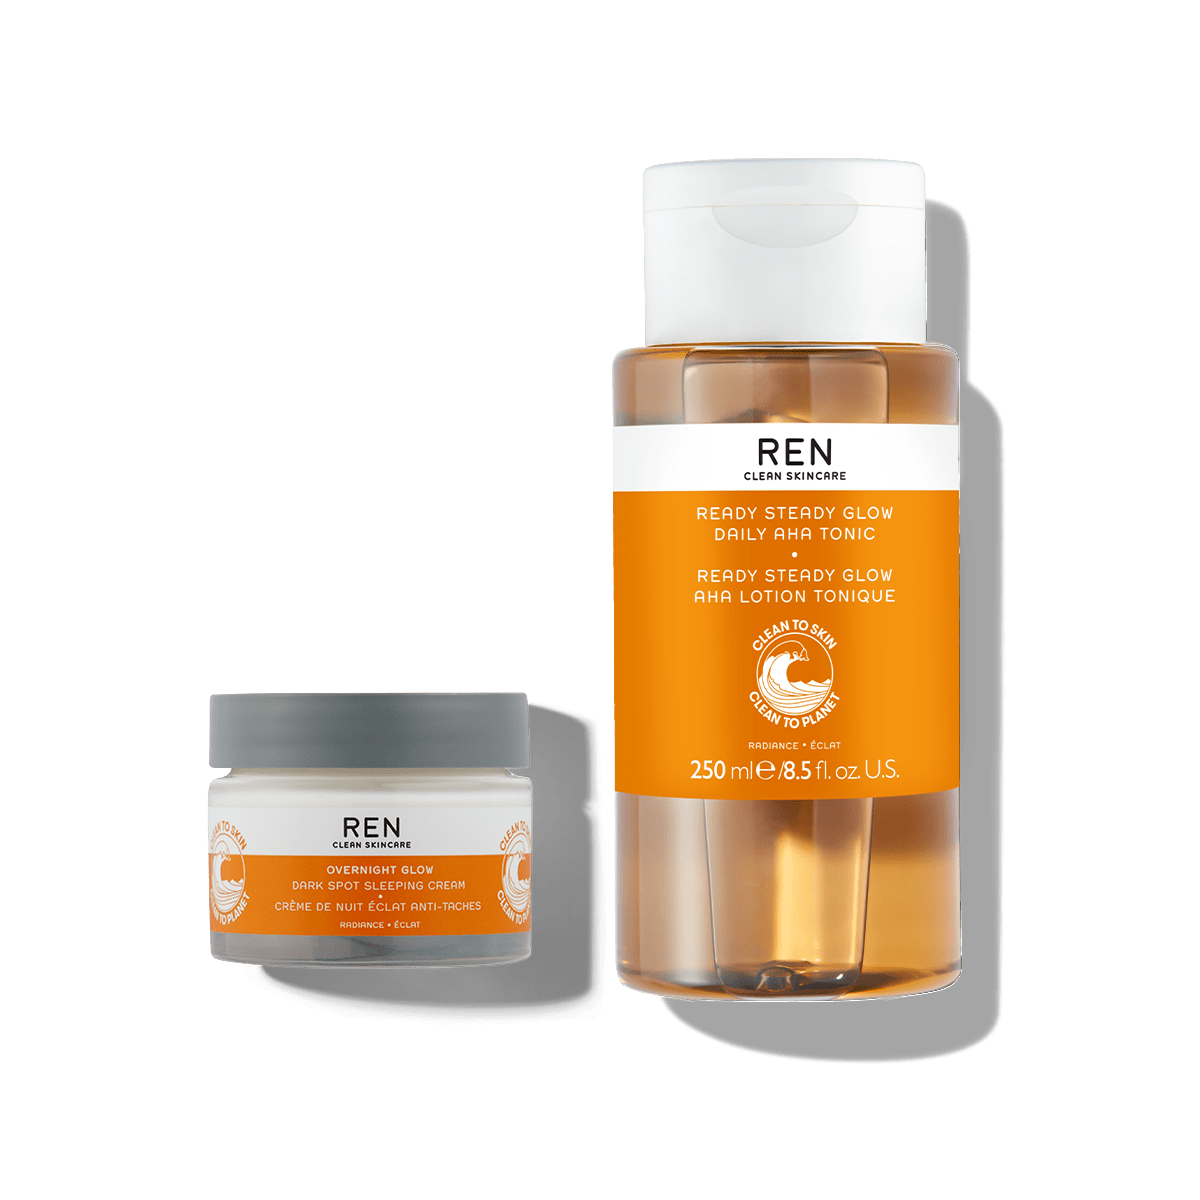 ren-clean-skincare-night-duo-glowing-and-even-skin-28467790413866.png